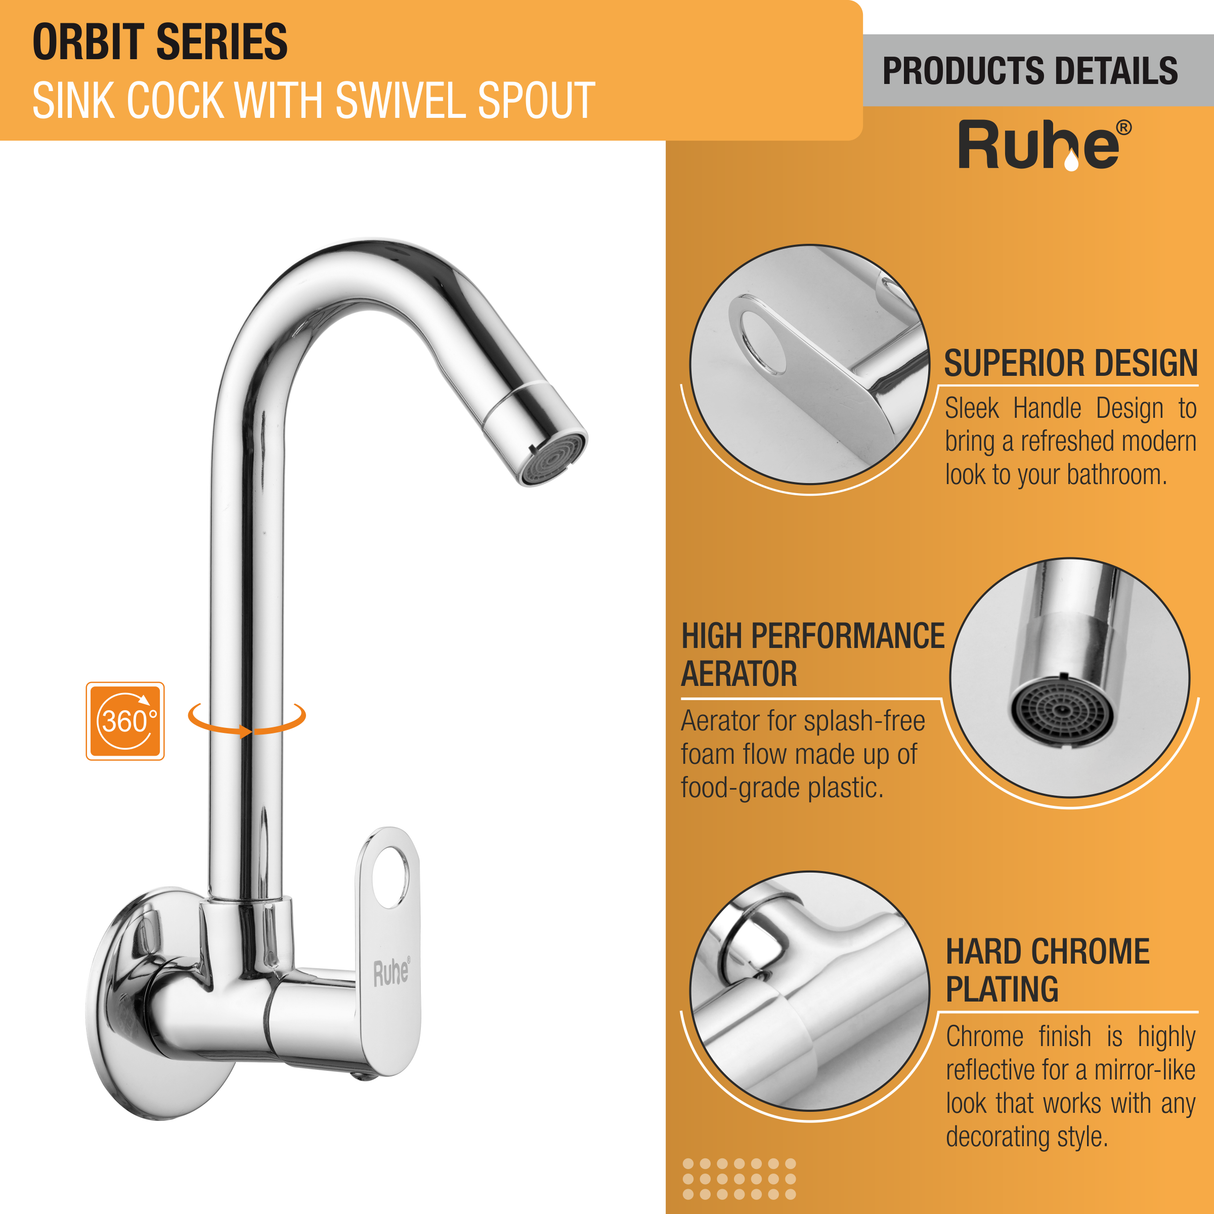 Orbit Sink Tap with Small (12 inches) Round Swivel Spout Brass Faucet product details